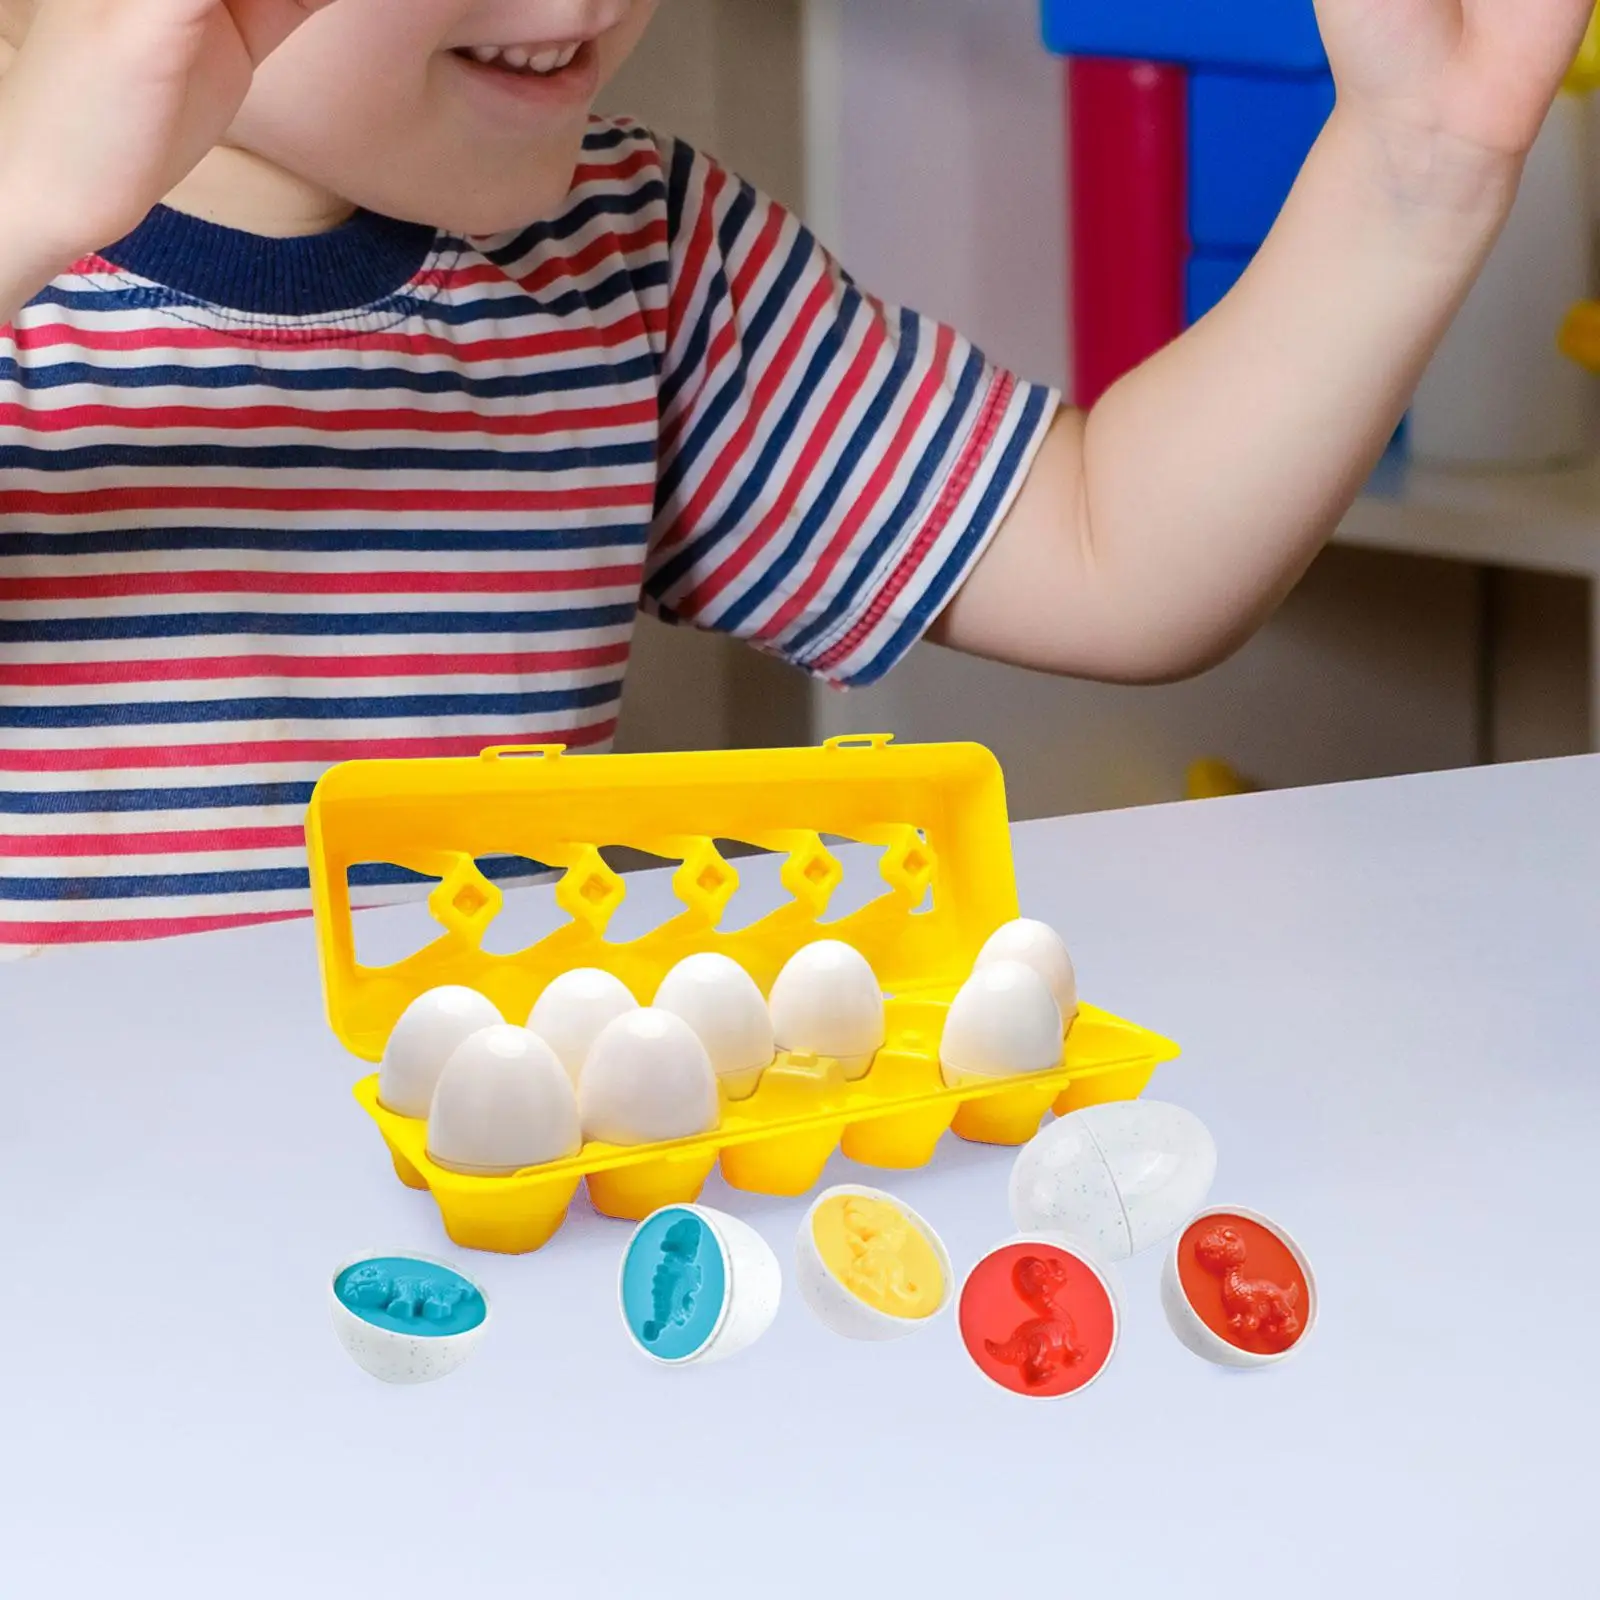 12x Matching Egg Play Set Shape Sorting & Color Recognition Montessori Toy for 3 4 5 6 Years Old Easter Basket Gift Children